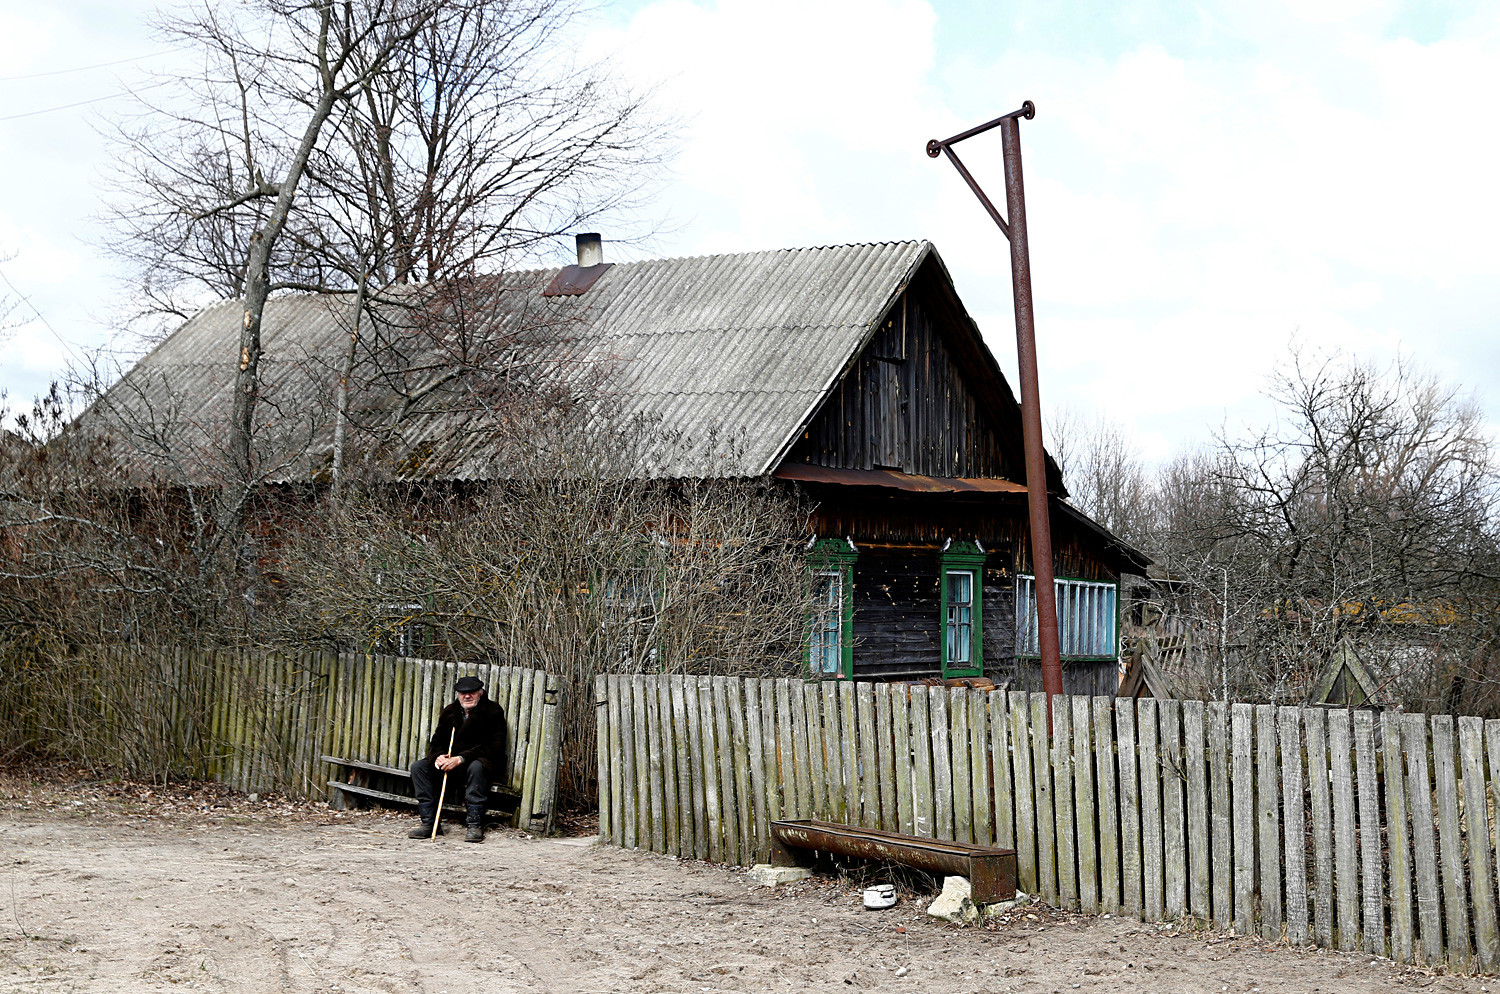 Ivan Shamyanok, 90, sits in front of his house in the village of Tulgovichi, near the exclusion zone. He is not eager to leave his land.